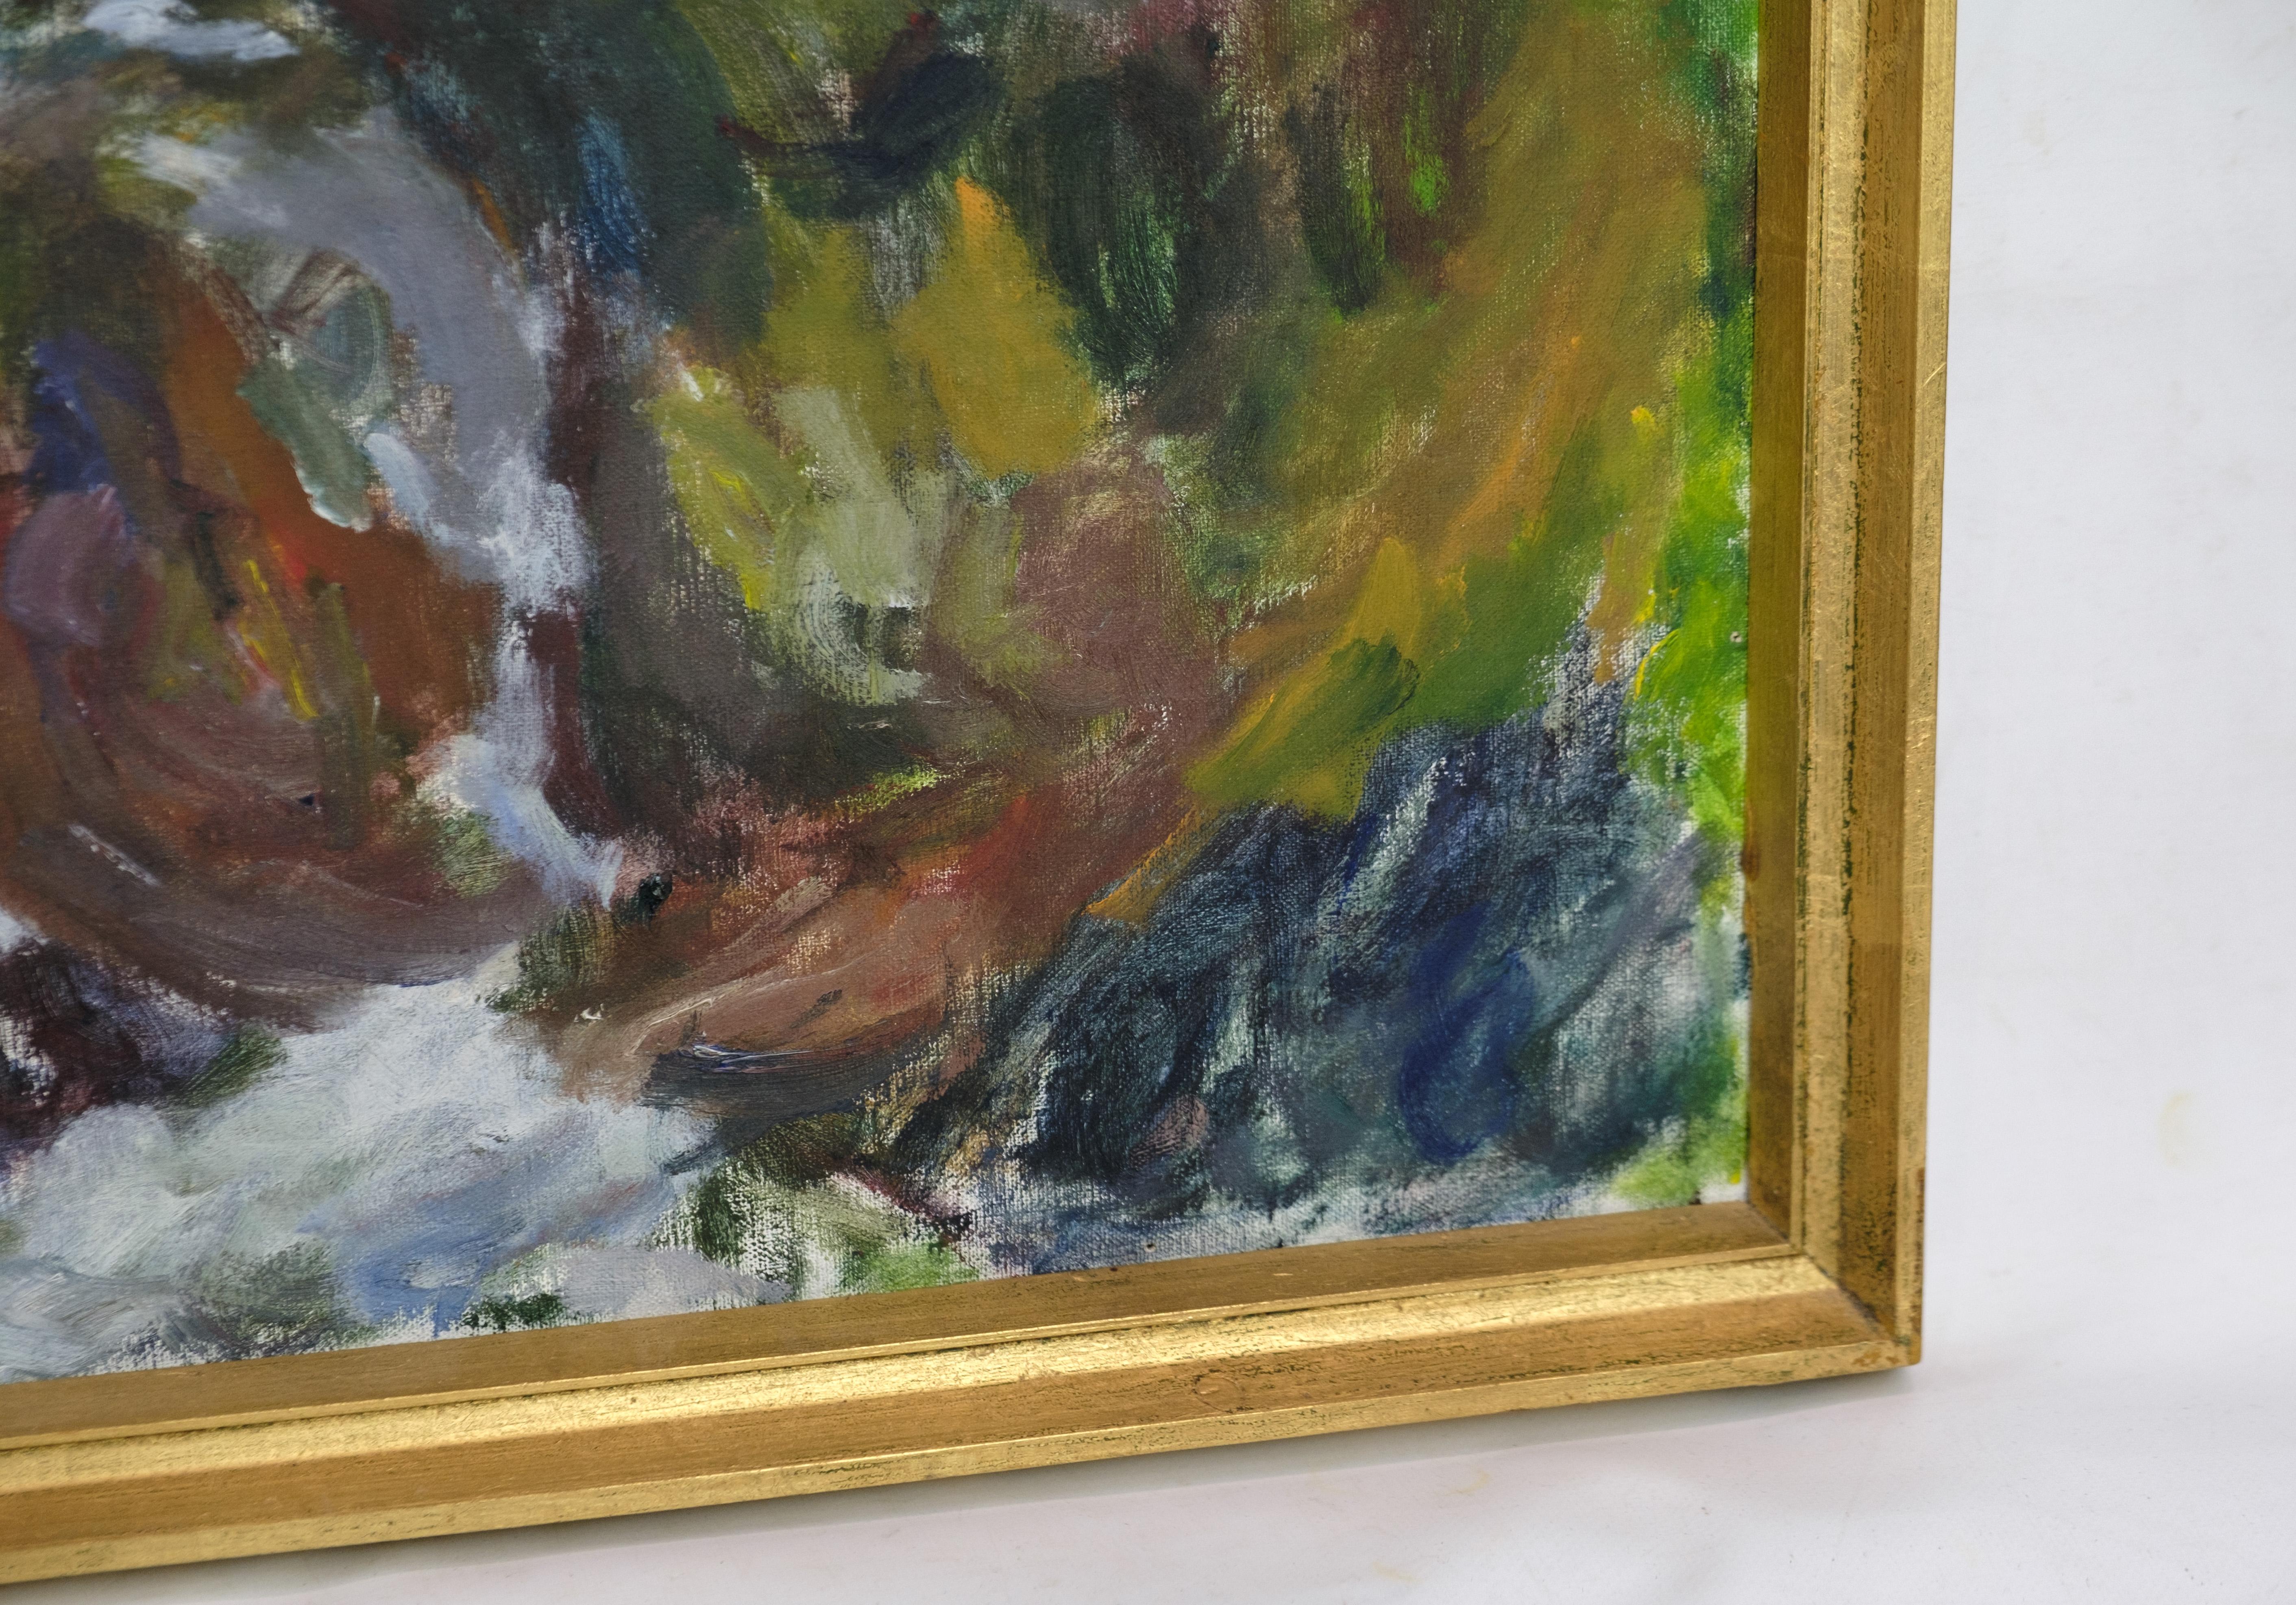 Mid-Century Modern Oil Painting With Green & Brown Shades By Sixten Wiklund From 1950s For Sale